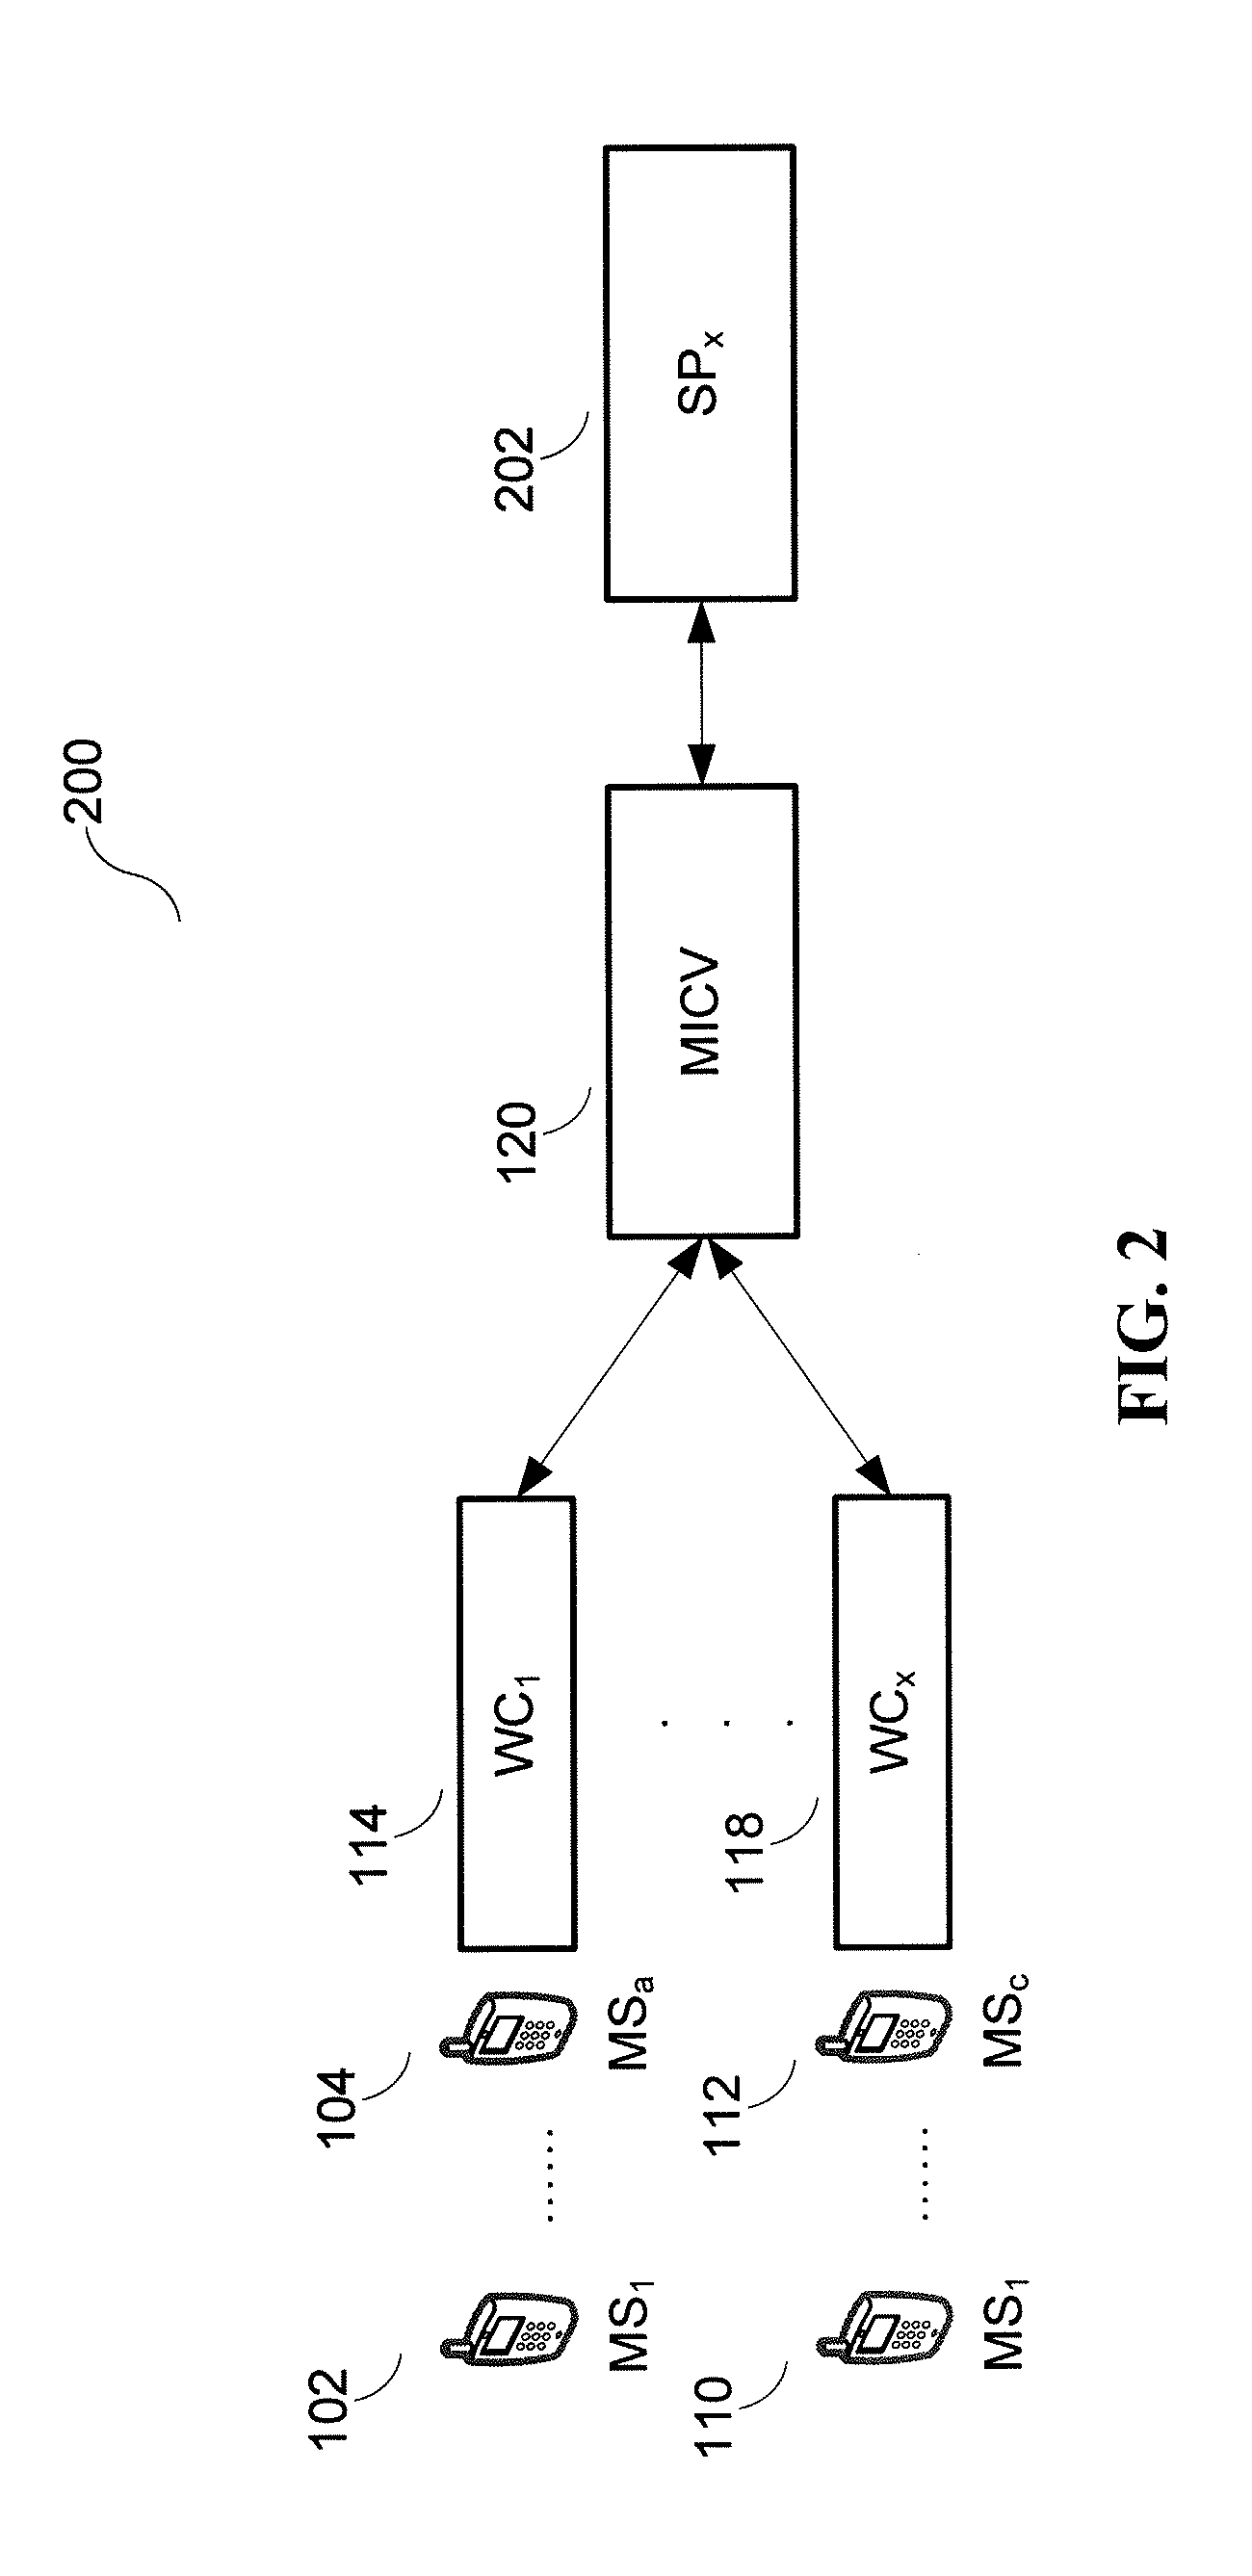 System and Method for Dynamic Spam Detection